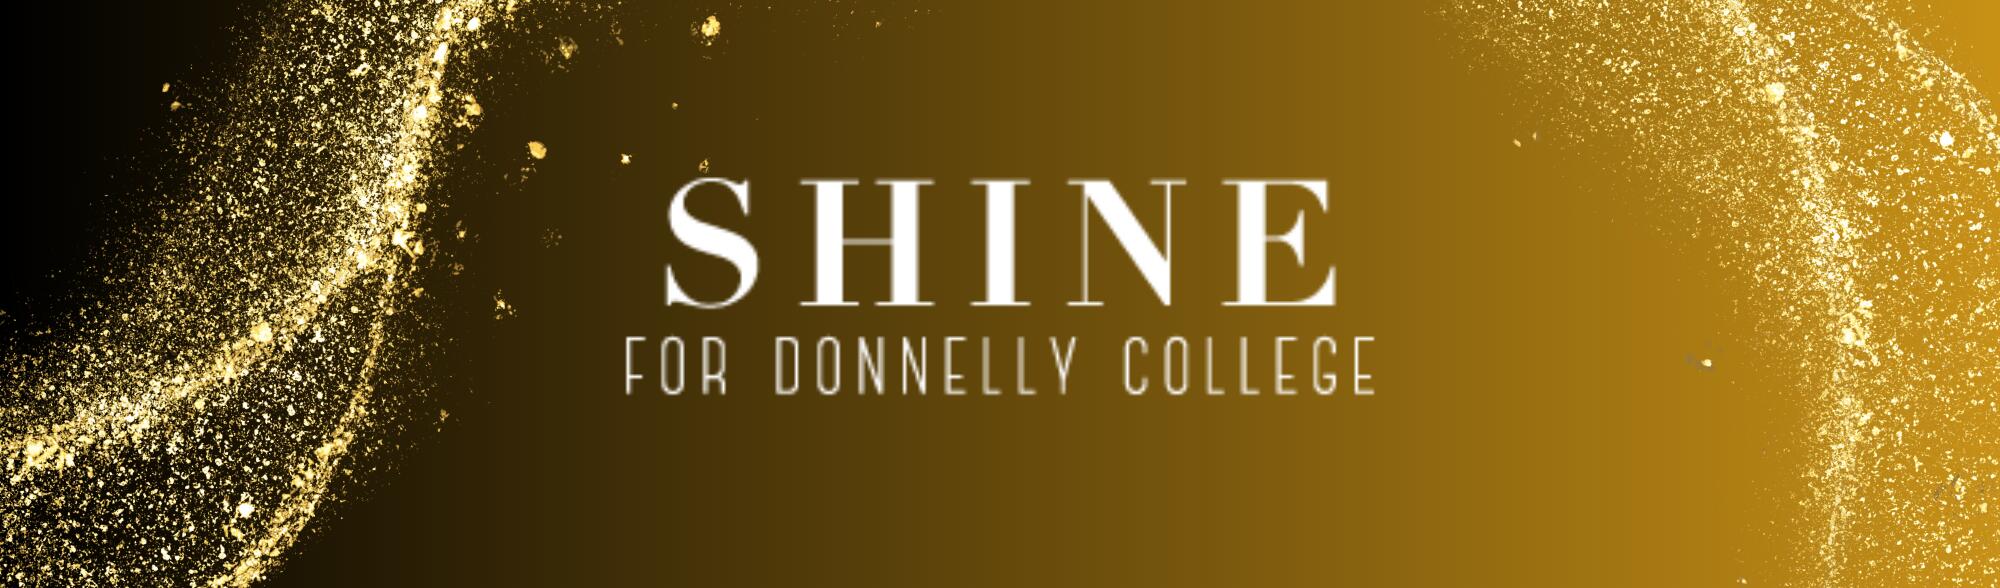 Shine for Donnelly College